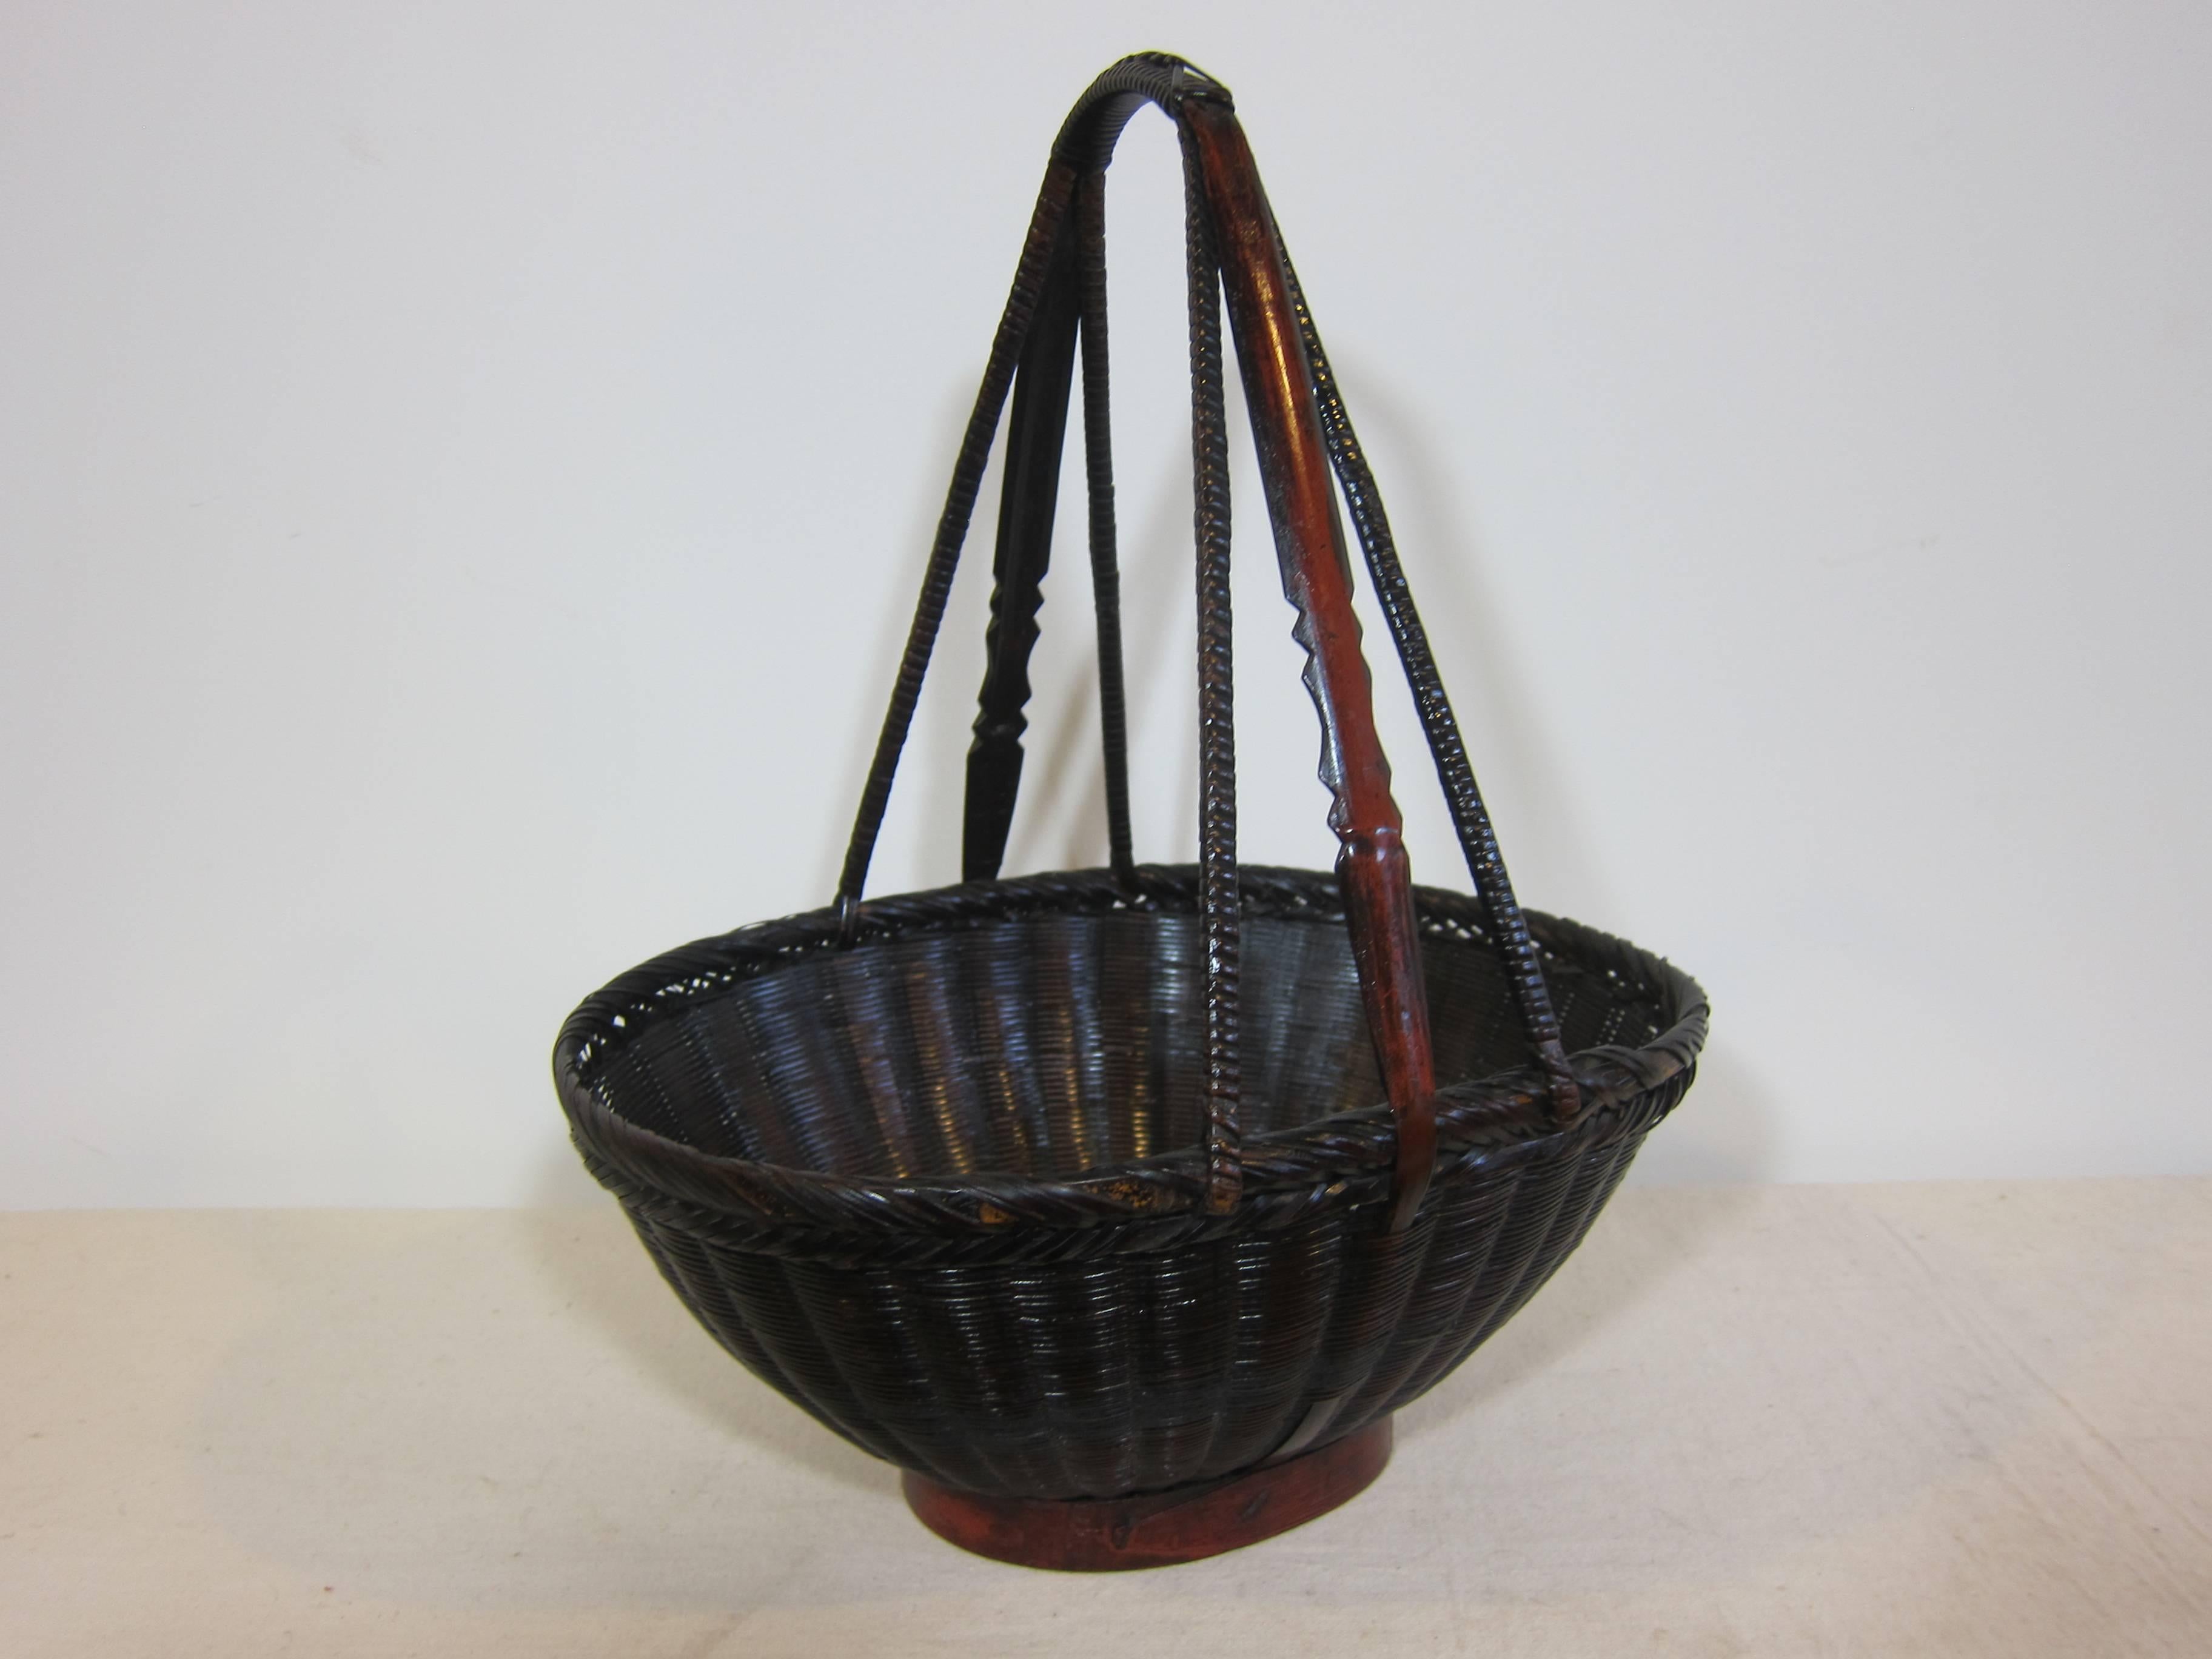 19th century antique woven basket. Decorative basket. This is an actual antique market basket in very good condition. Woven reed, bamboo, and wood. Having intricate detailed work, with carved handles.
    